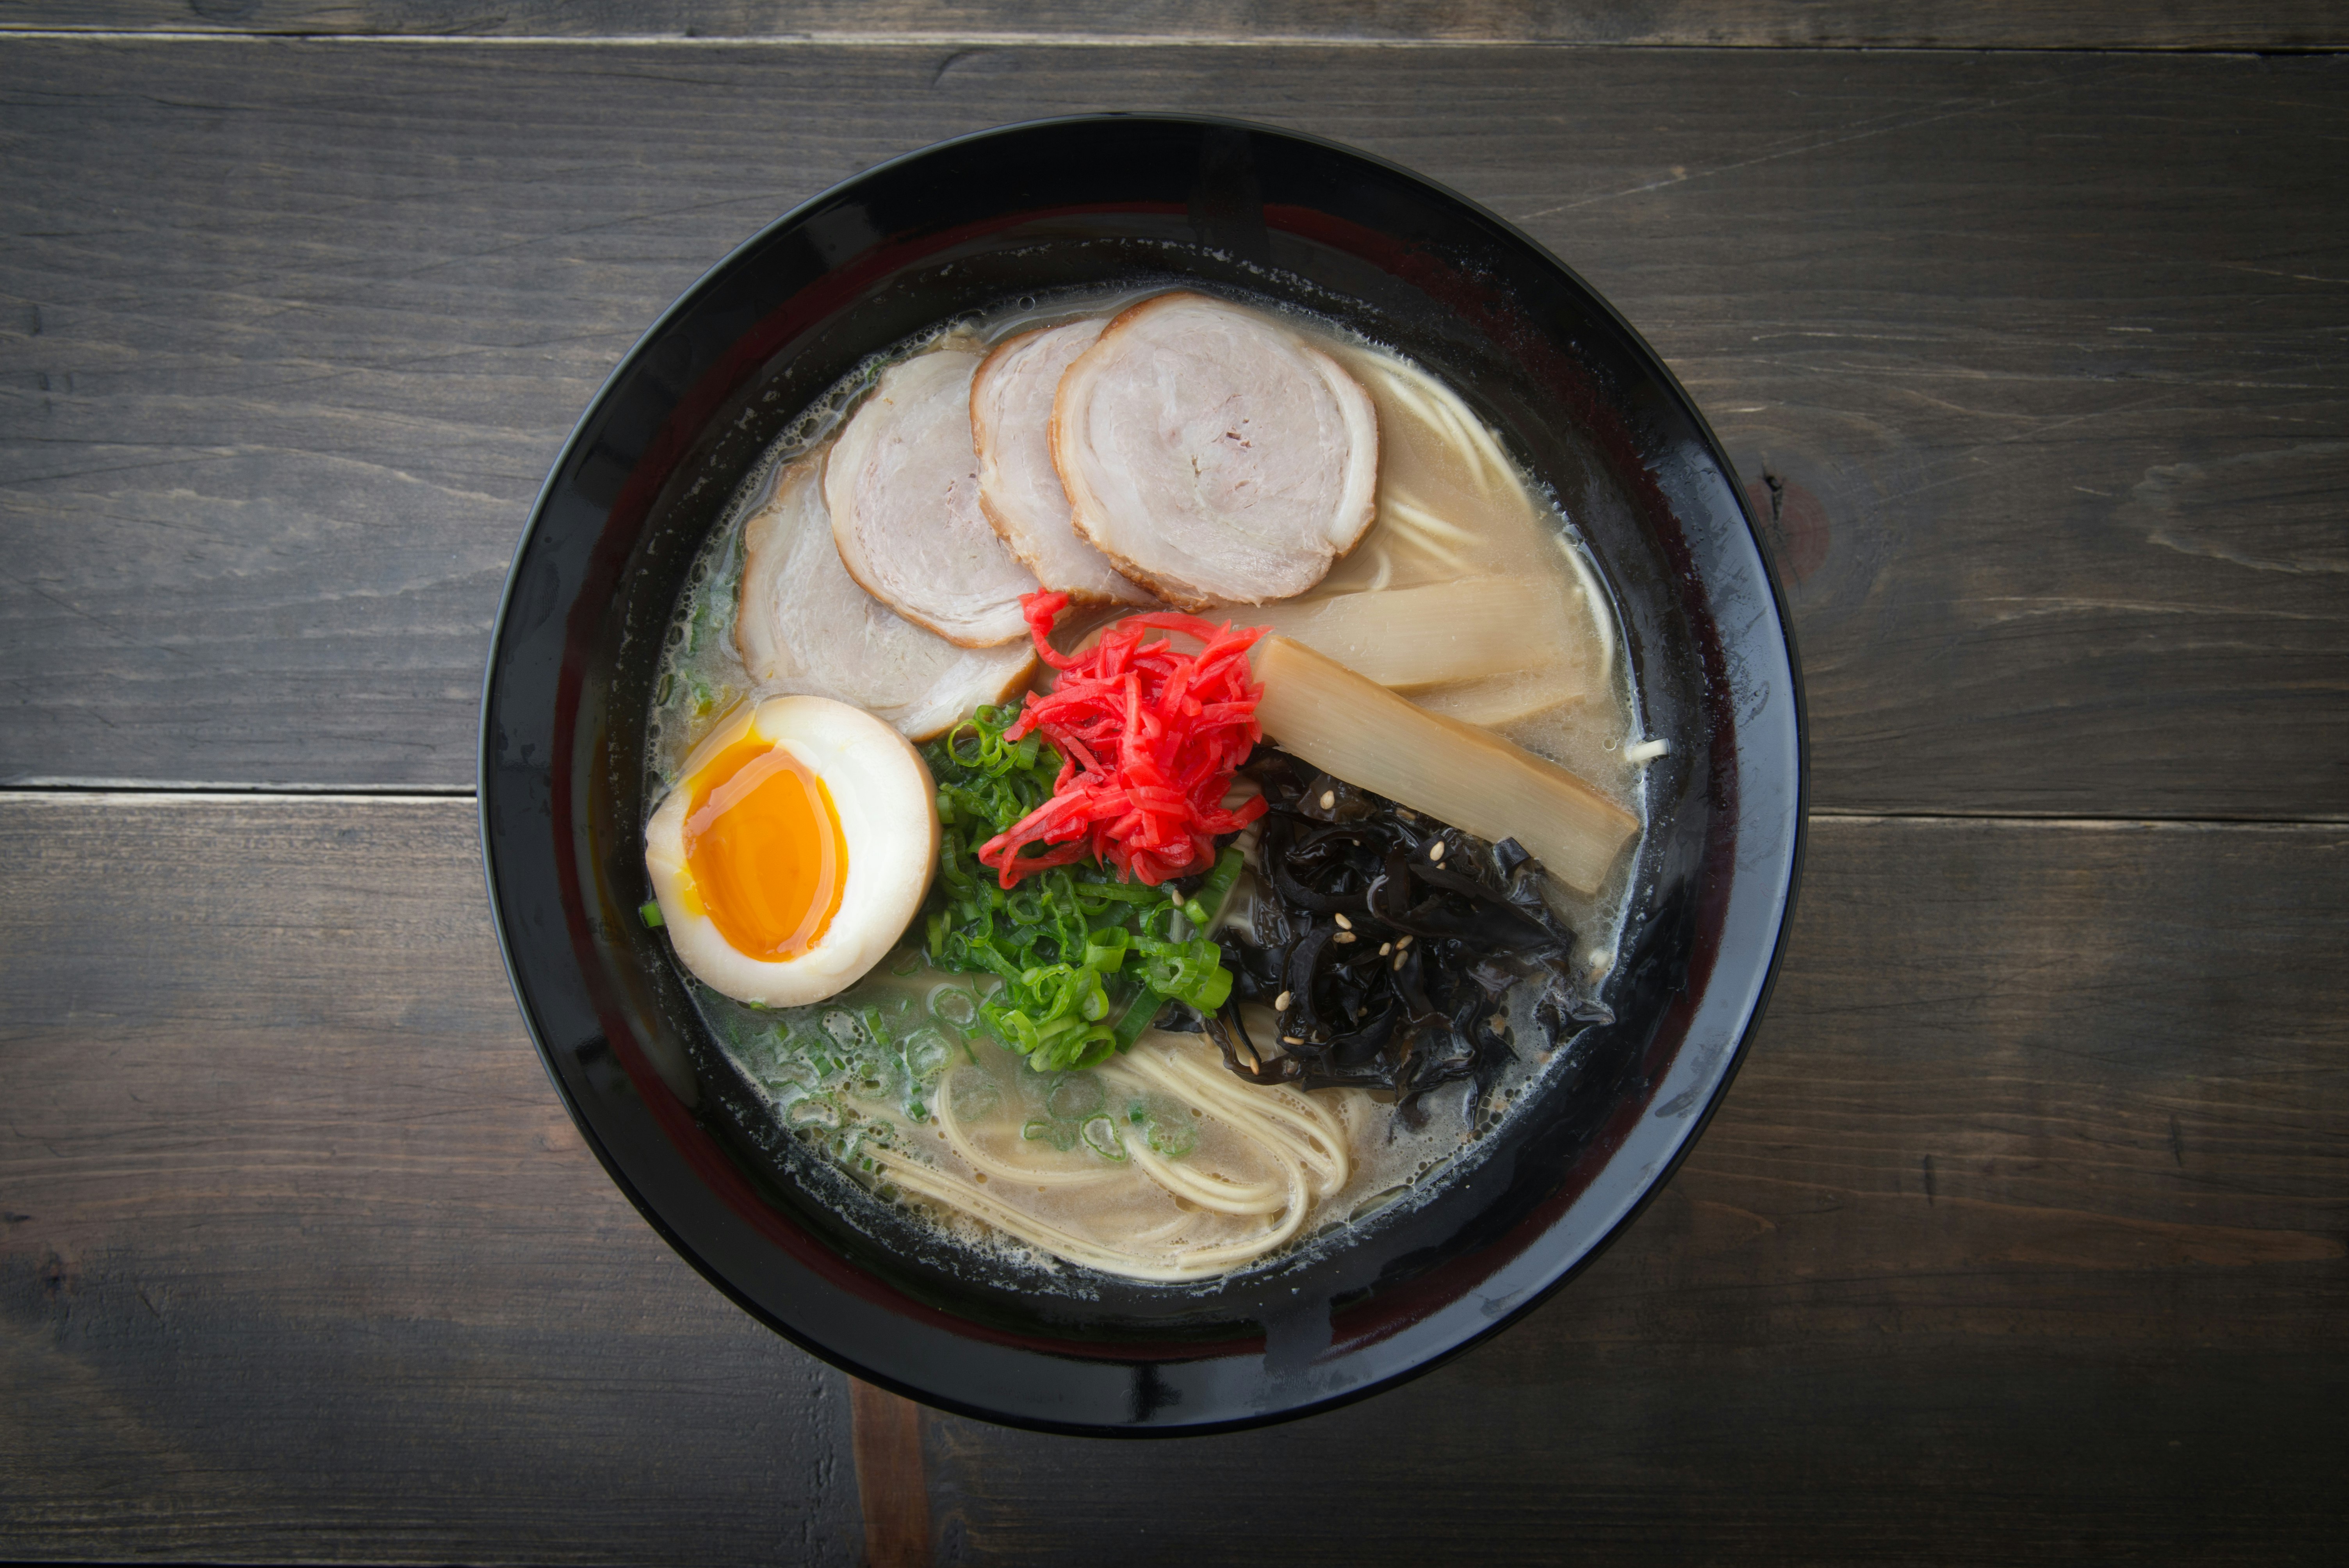 A glossy black bowl filled with ramen noodles, clear broth, round slices of pork, spring onions, half a soft-boiled egg, and other colourful ingredients.